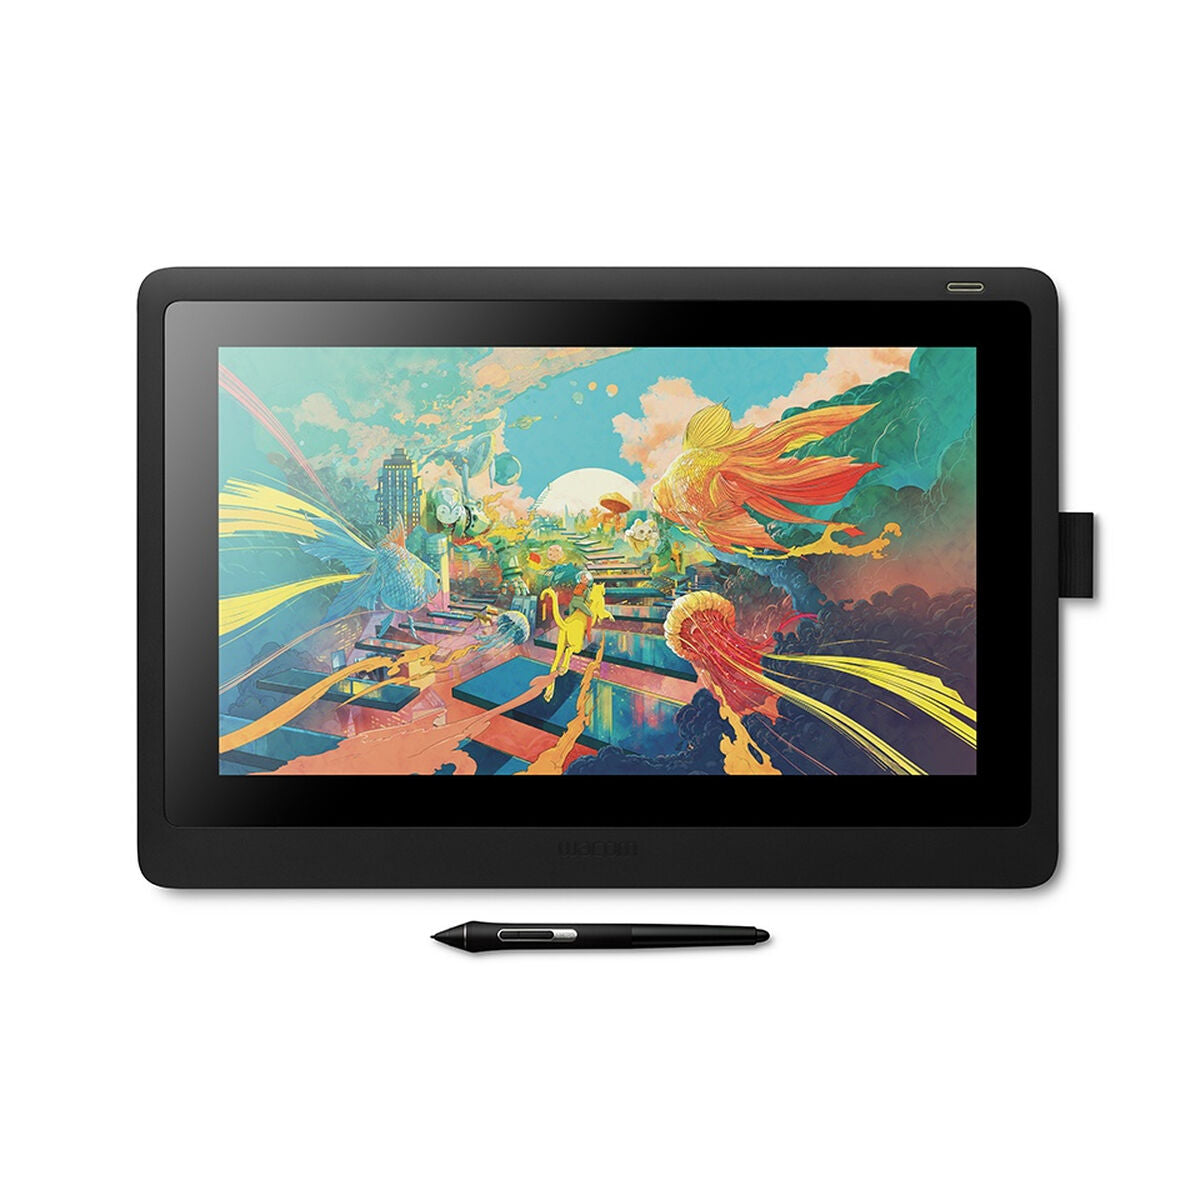 Graphics tablets and pens Wacom DTK1660K0B, Wacom, Computing, Accessories, graphics-tablets-and-pens-wacom-dtk1660k0b, Brand_Wacom, category-reference-2609, category-reference-2803, category-reference-2812, category-reference-t-19685, category-reference-t-19908, category-reference-t-21353, computers / components, Condition_NEW, Price_900 - 1000, Teleworking, RiotNook